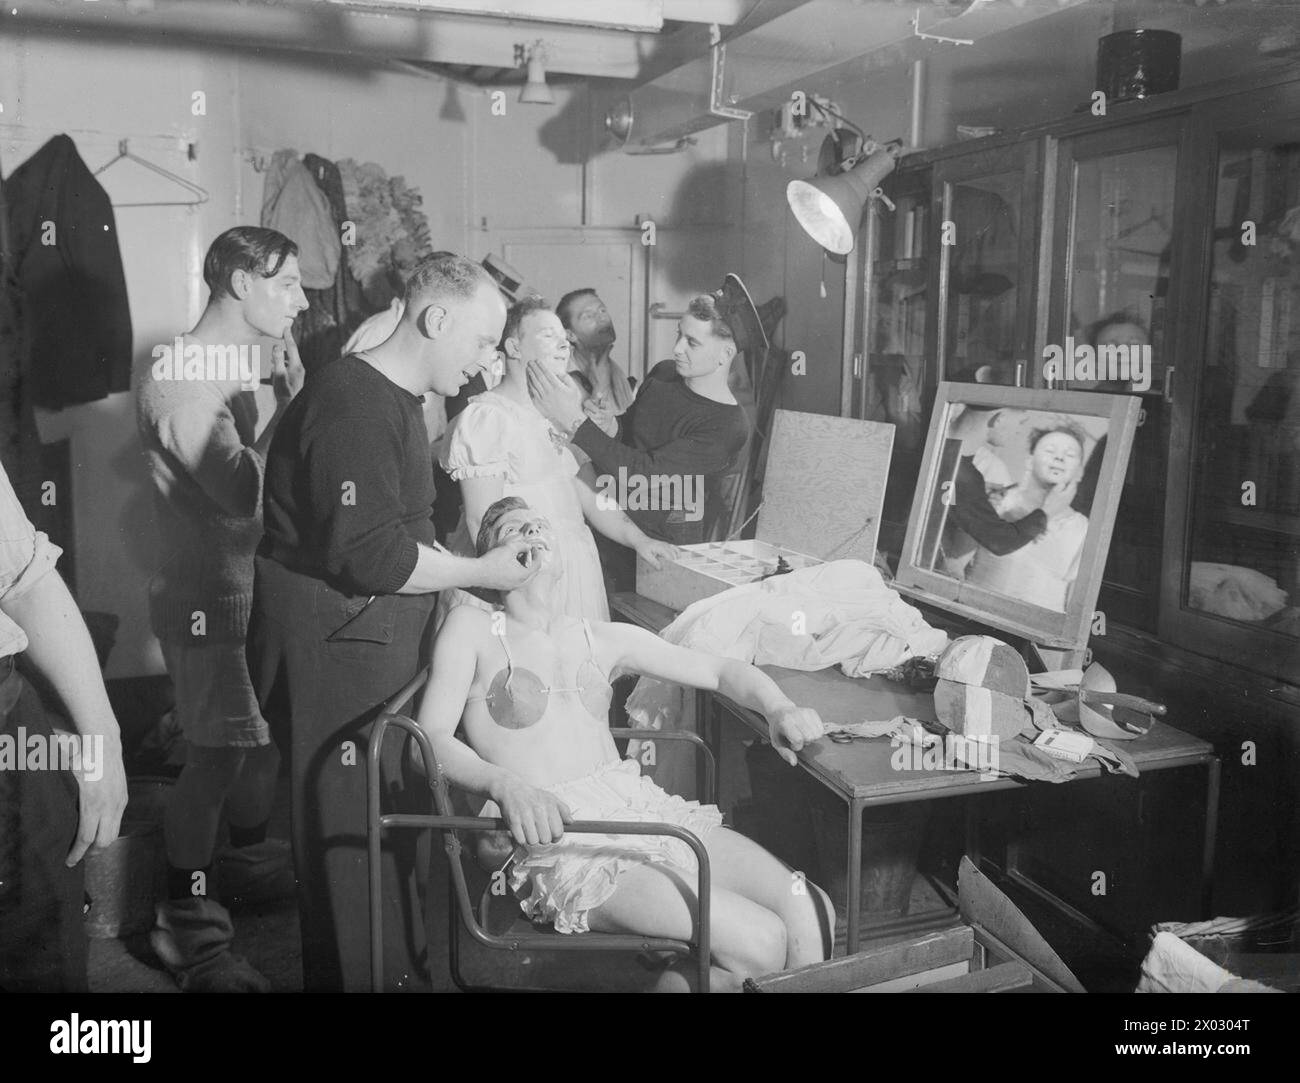 LEISURE AND ENTERTAINMENT DURING THE SECOND WORLD WAR - The Armed Forces: Sailors prepare a Christmas concert on board HMS TYNE at Scapa Flow. The absence of women on board usually required some performers to dress up as women. The picture shows the cast's female impersonators donning costumes and applying make up. Nearest the camera, Leading Stoker R C Wright making up Stoker A J Barnes, while in the background, Stoker F Dickinson being made up by Stoker A Hills  Royal Navy, TYNE (HMS) Stock Photo